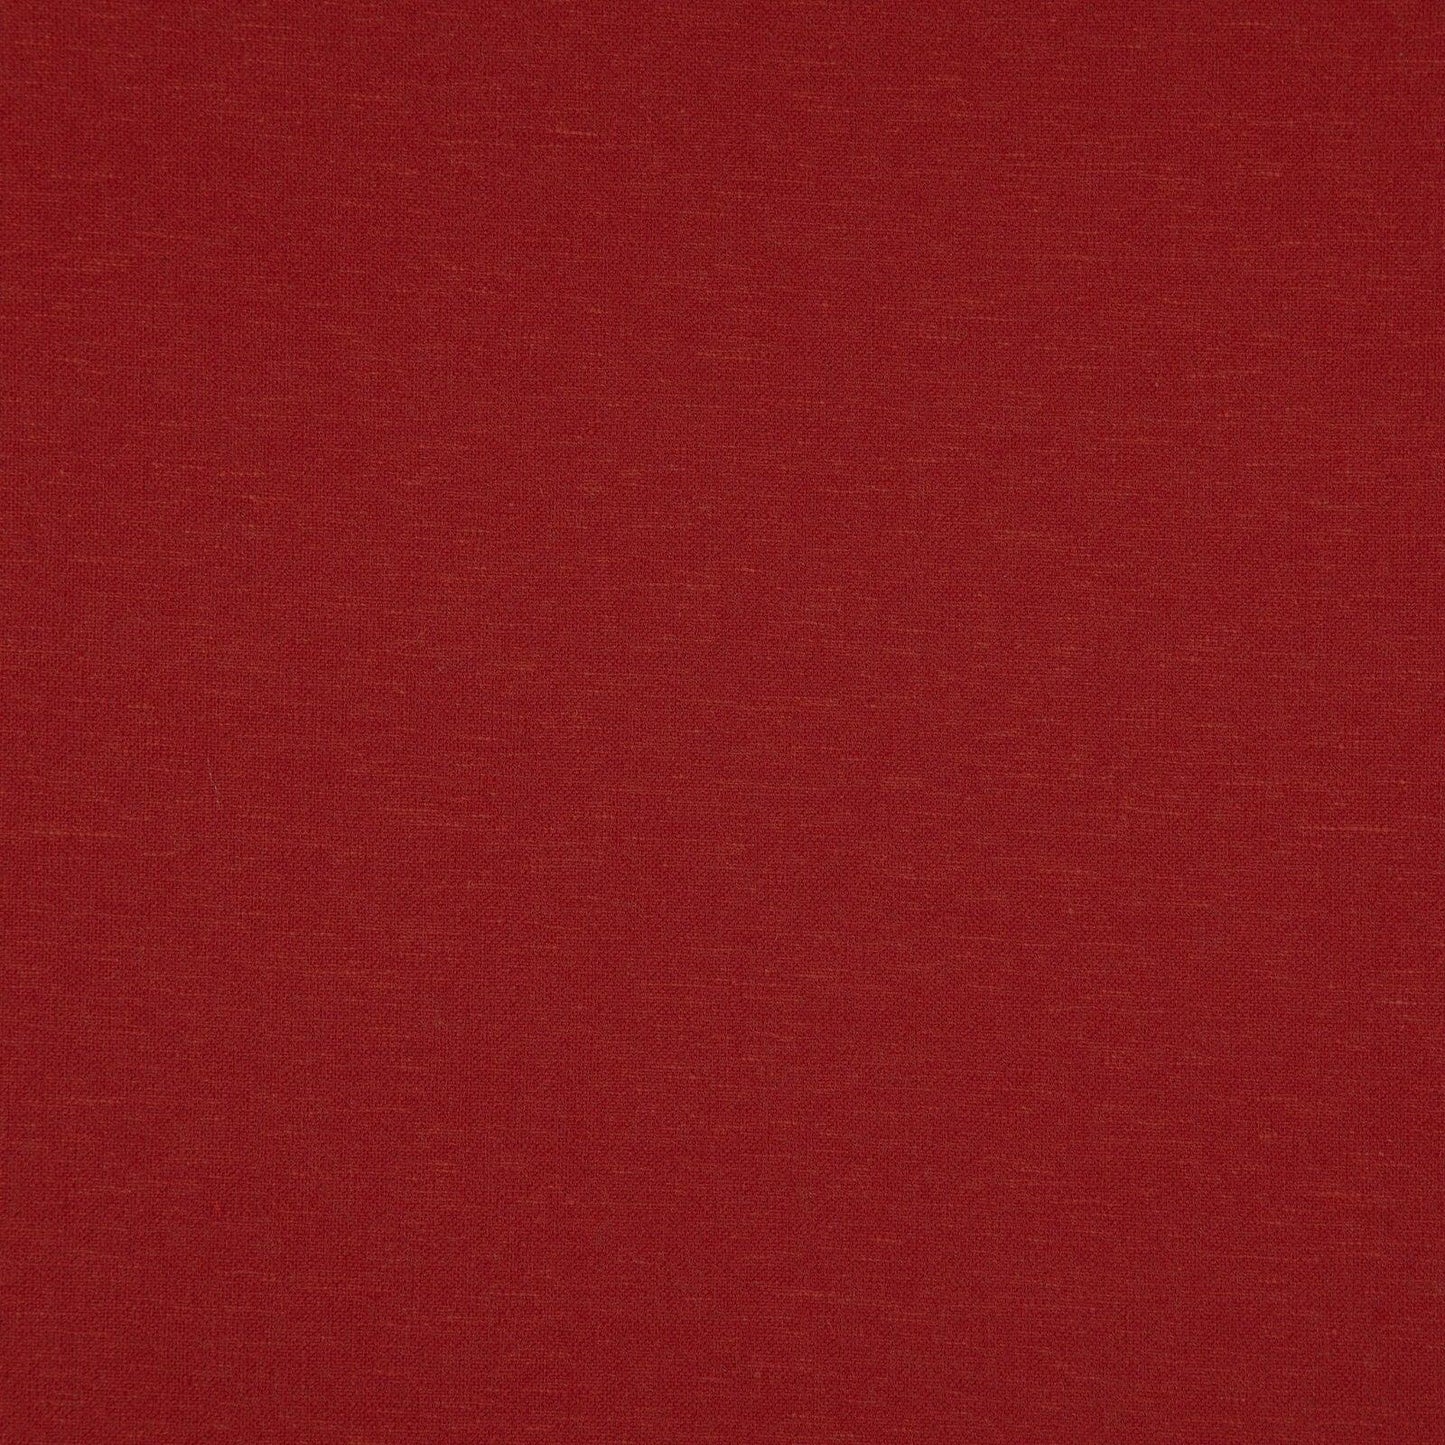 Linen Upholstery Fabric Spark Red